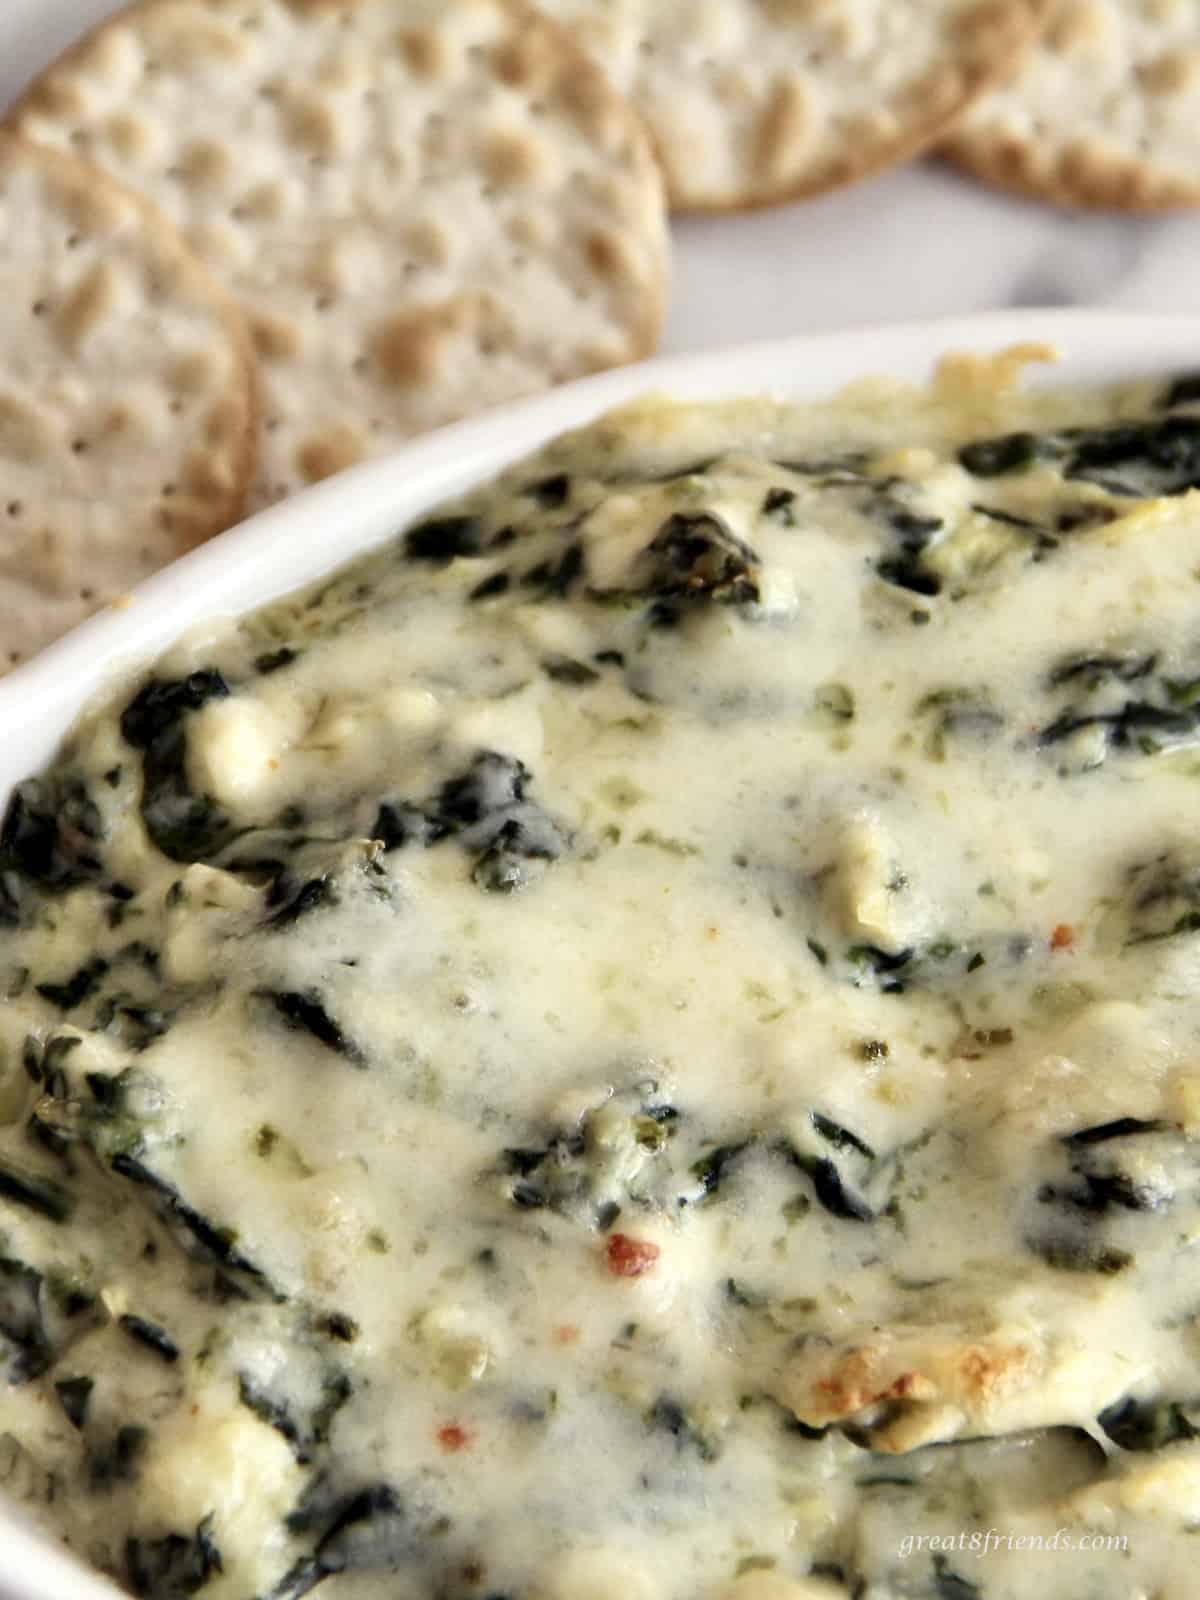 Upclose photo of a warm appetizer dip including spinach, artichokes and cheeses.